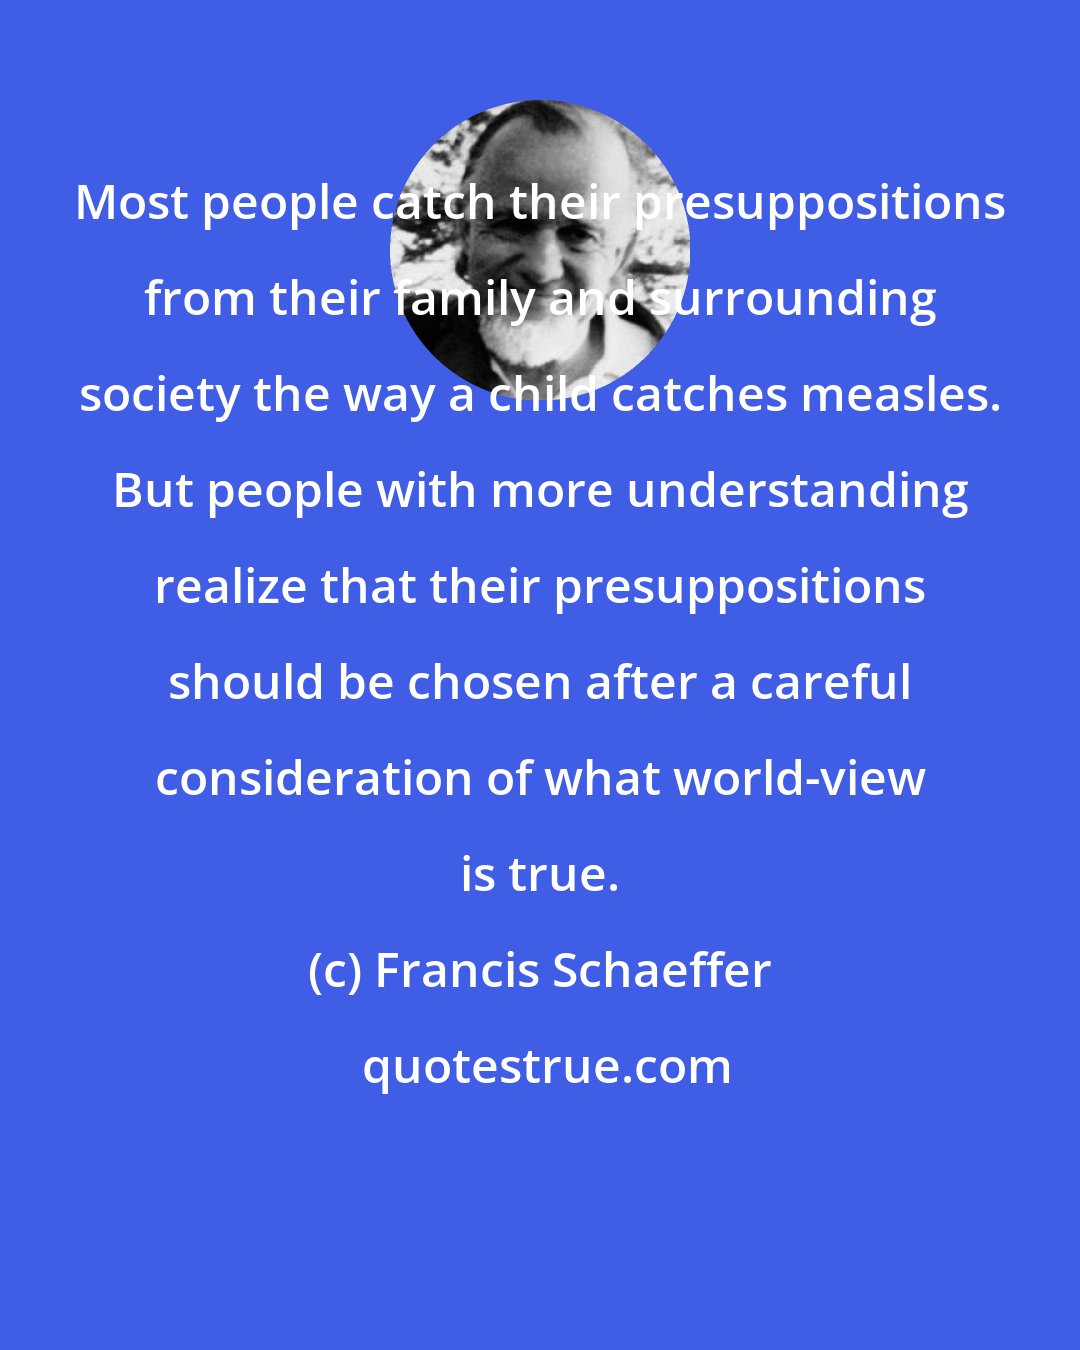 Francis Schaeffer: Most people catch their presuppositions from their family and surrounding society the way a child catches measles. But people with more understanding realize that their presuppositions should be chosen after a careful consideration of what world-view is true.